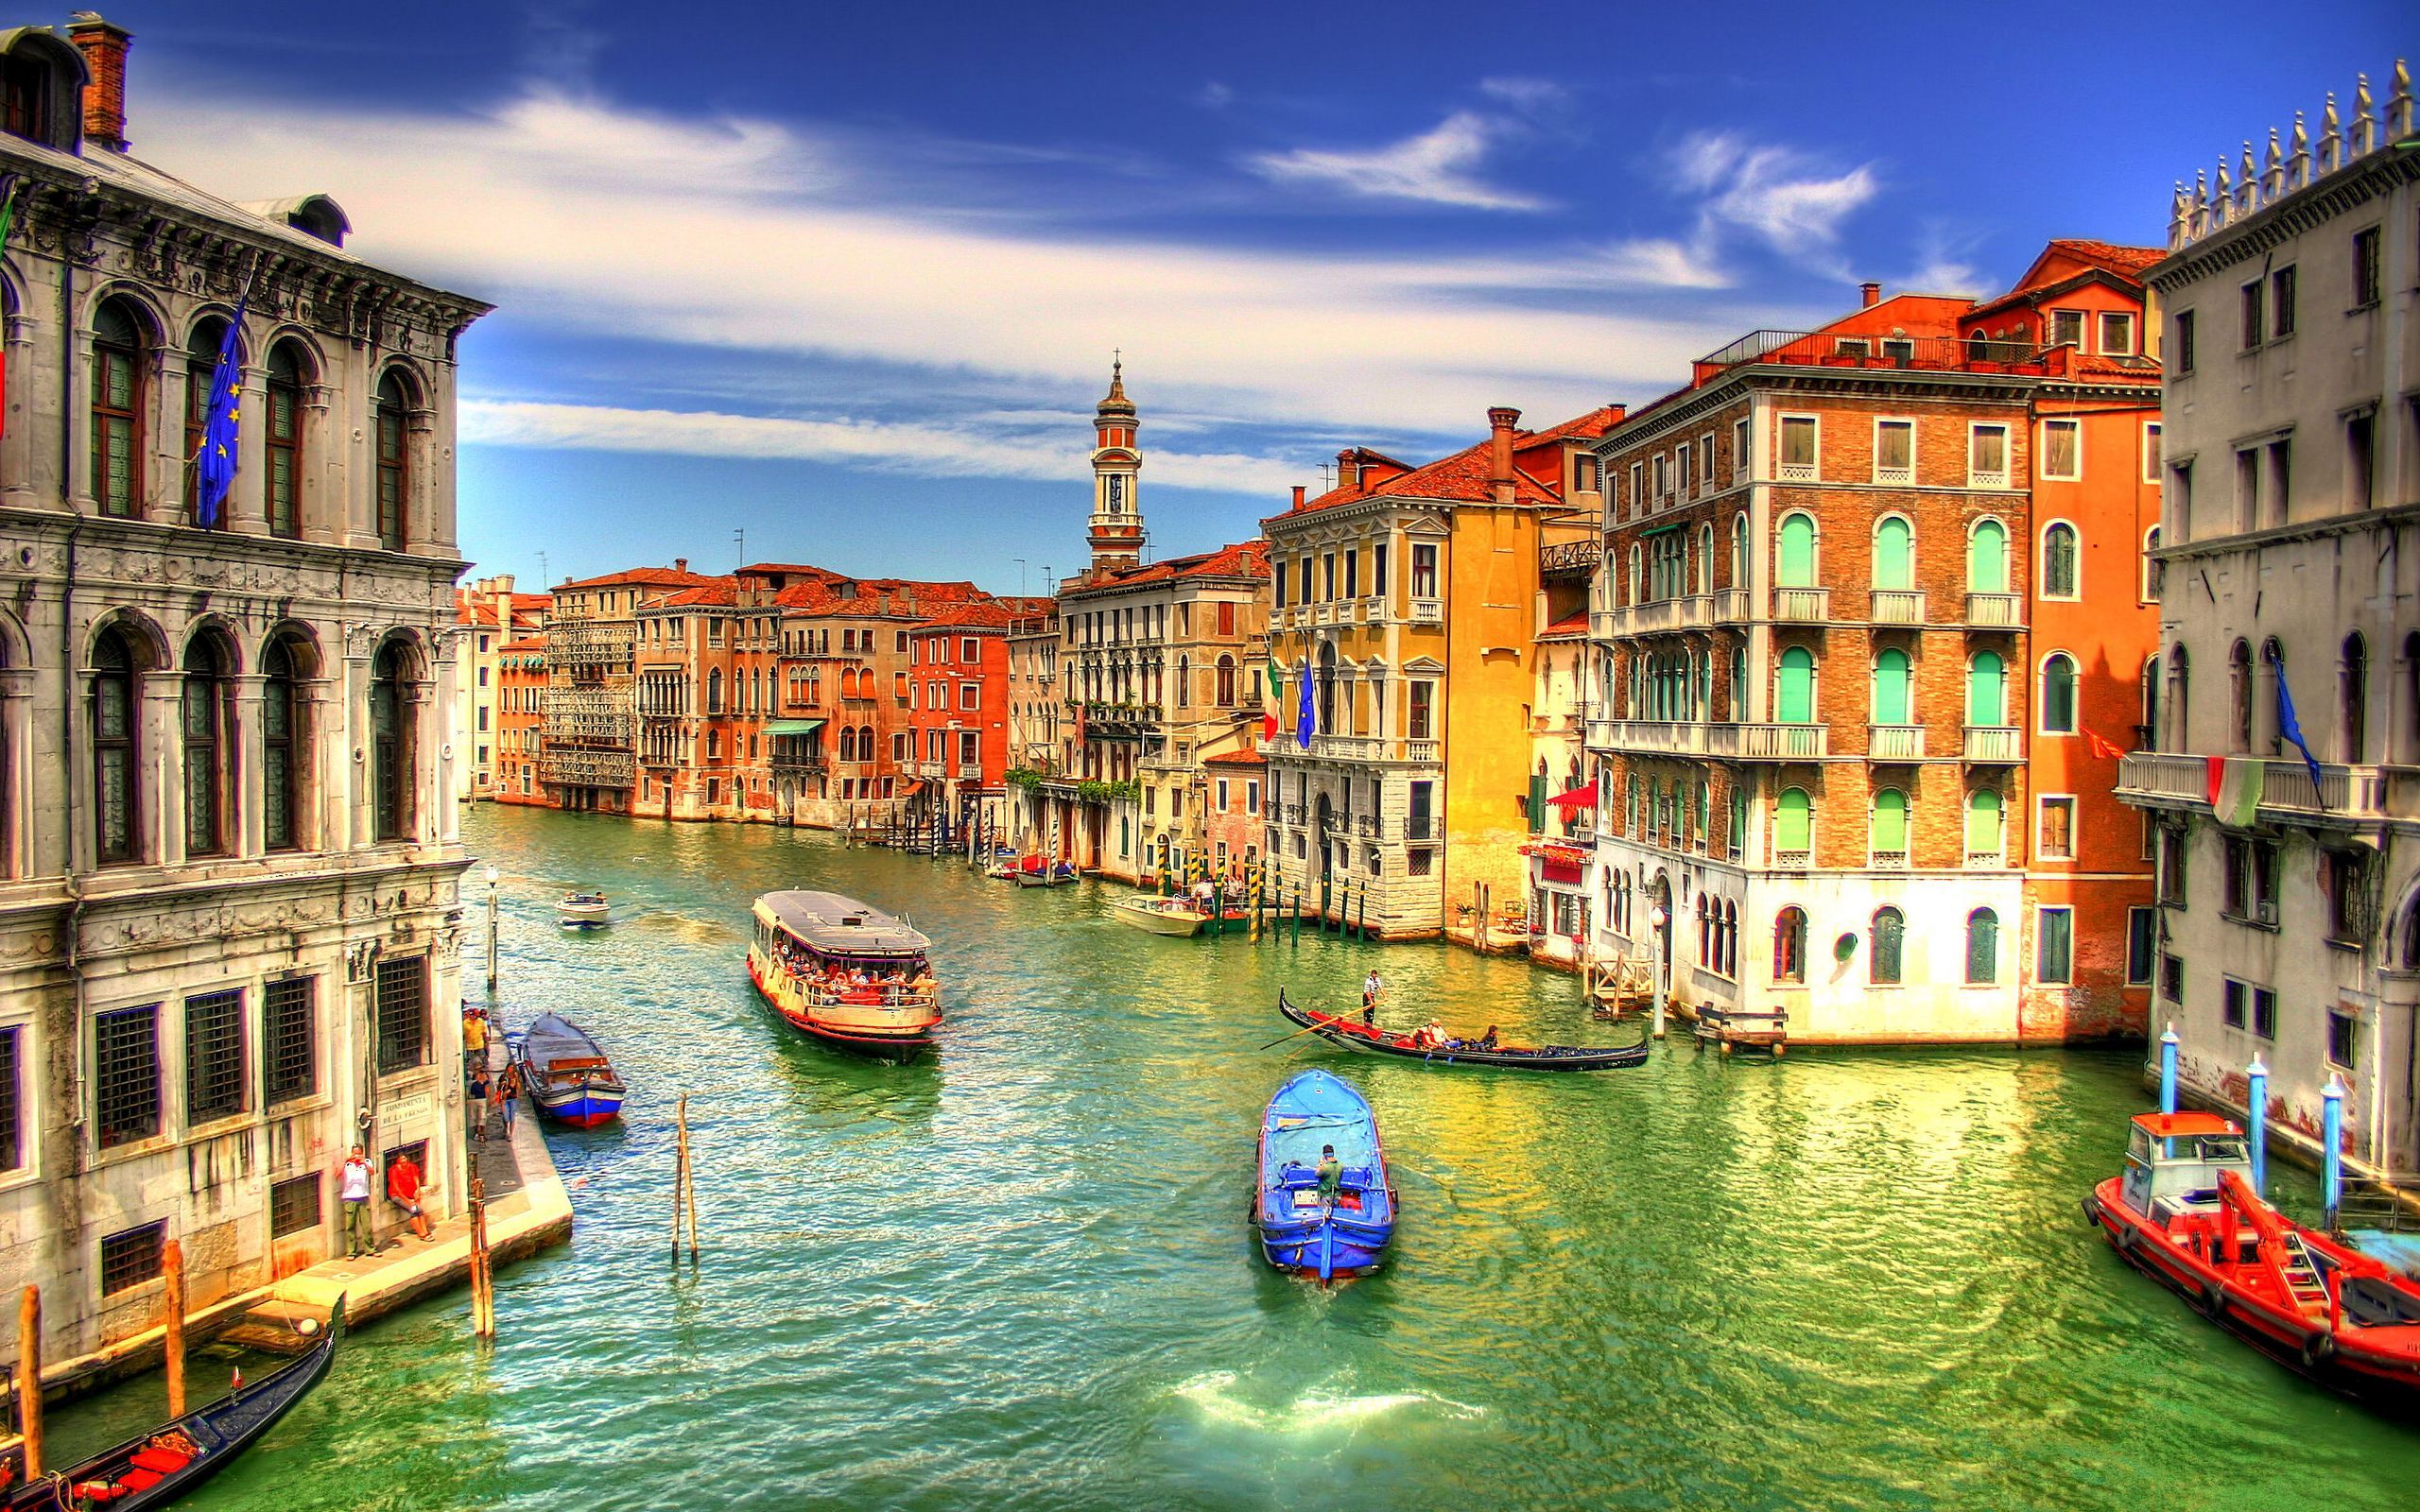 Italy Hd Wallpapers | Free HD Desktop Wallpapers - Widescreen Images